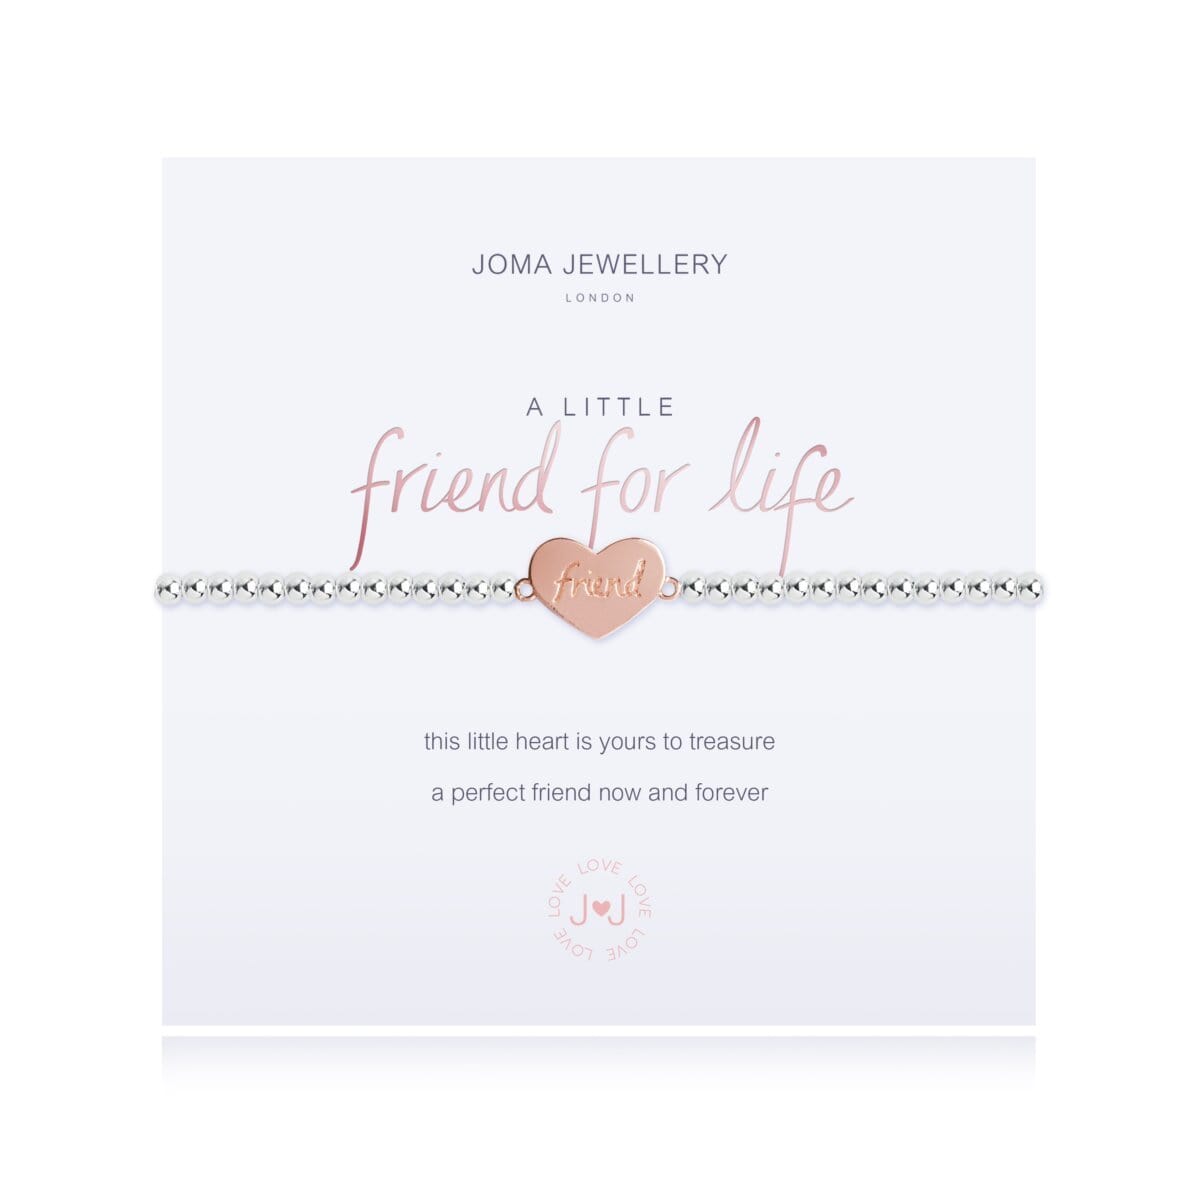 Joma Jewellery Bracelet Joma Jewellery Bracelet - A Little Friend for Life